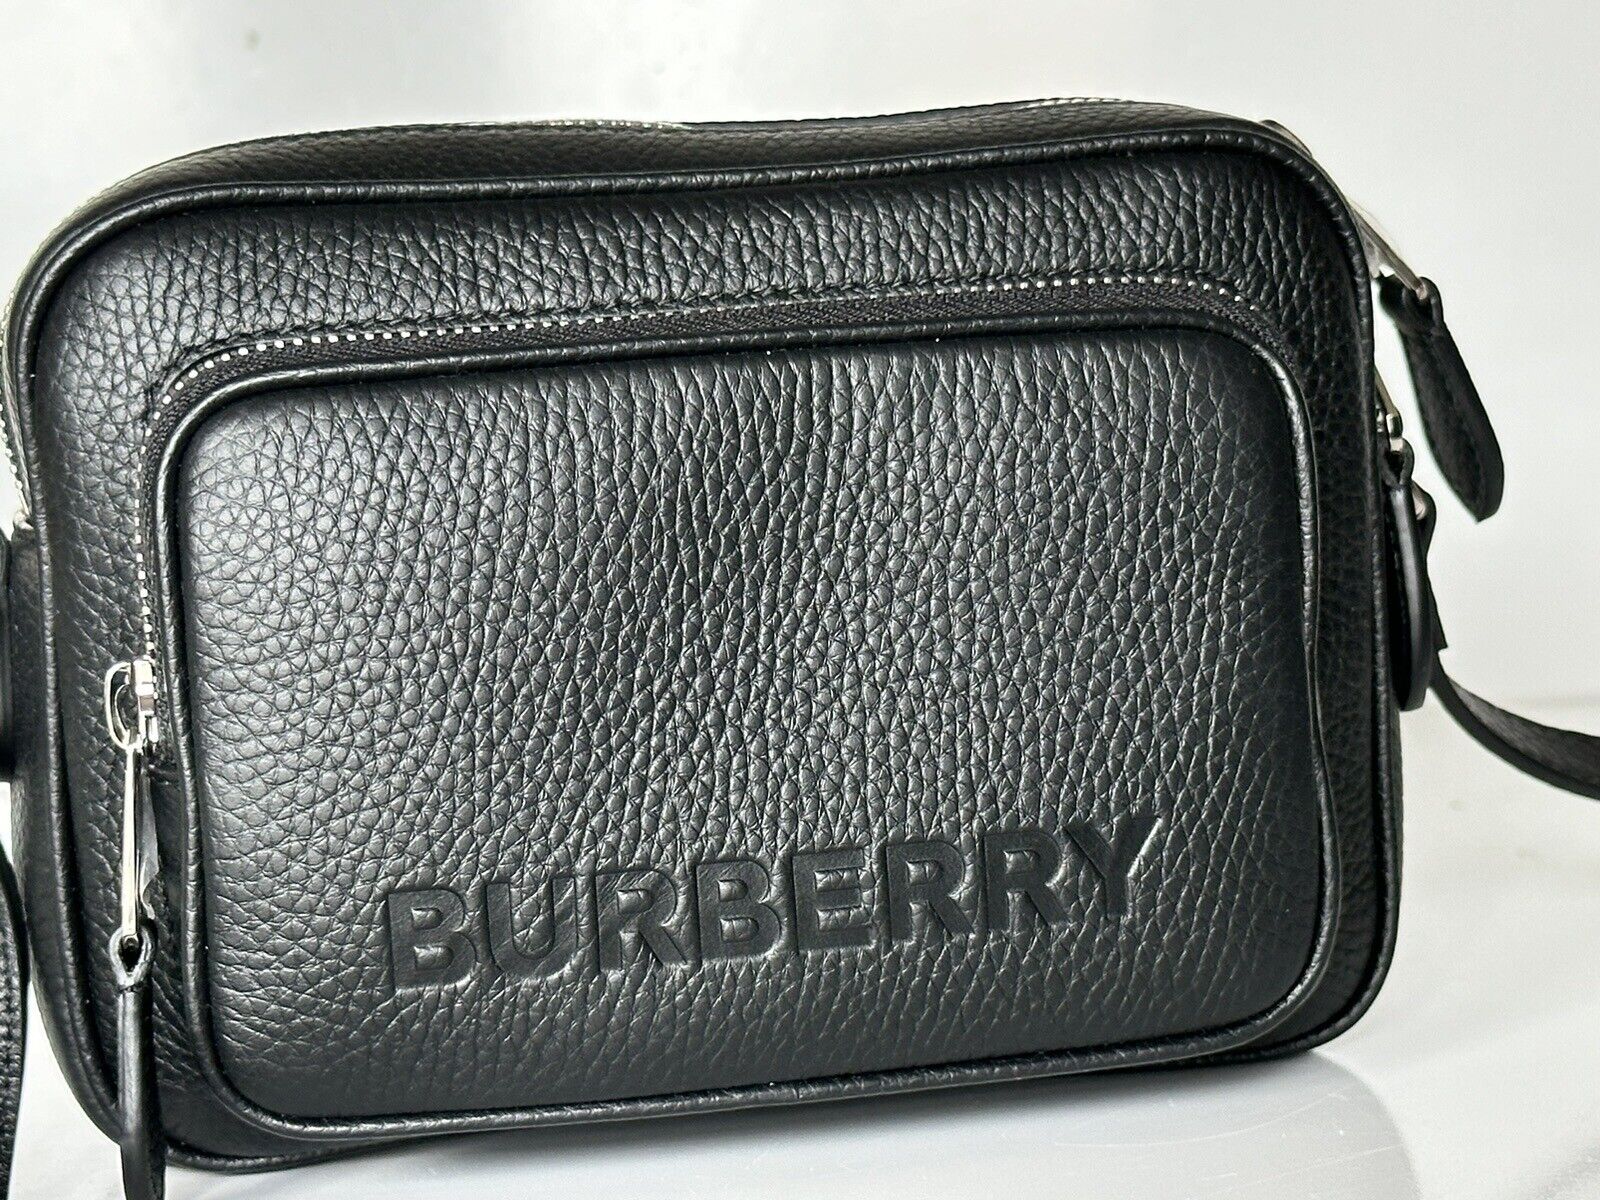 NWT $1290 Burberry Small Leather Camera Shoulder Bag Black Made in Italy 8061569